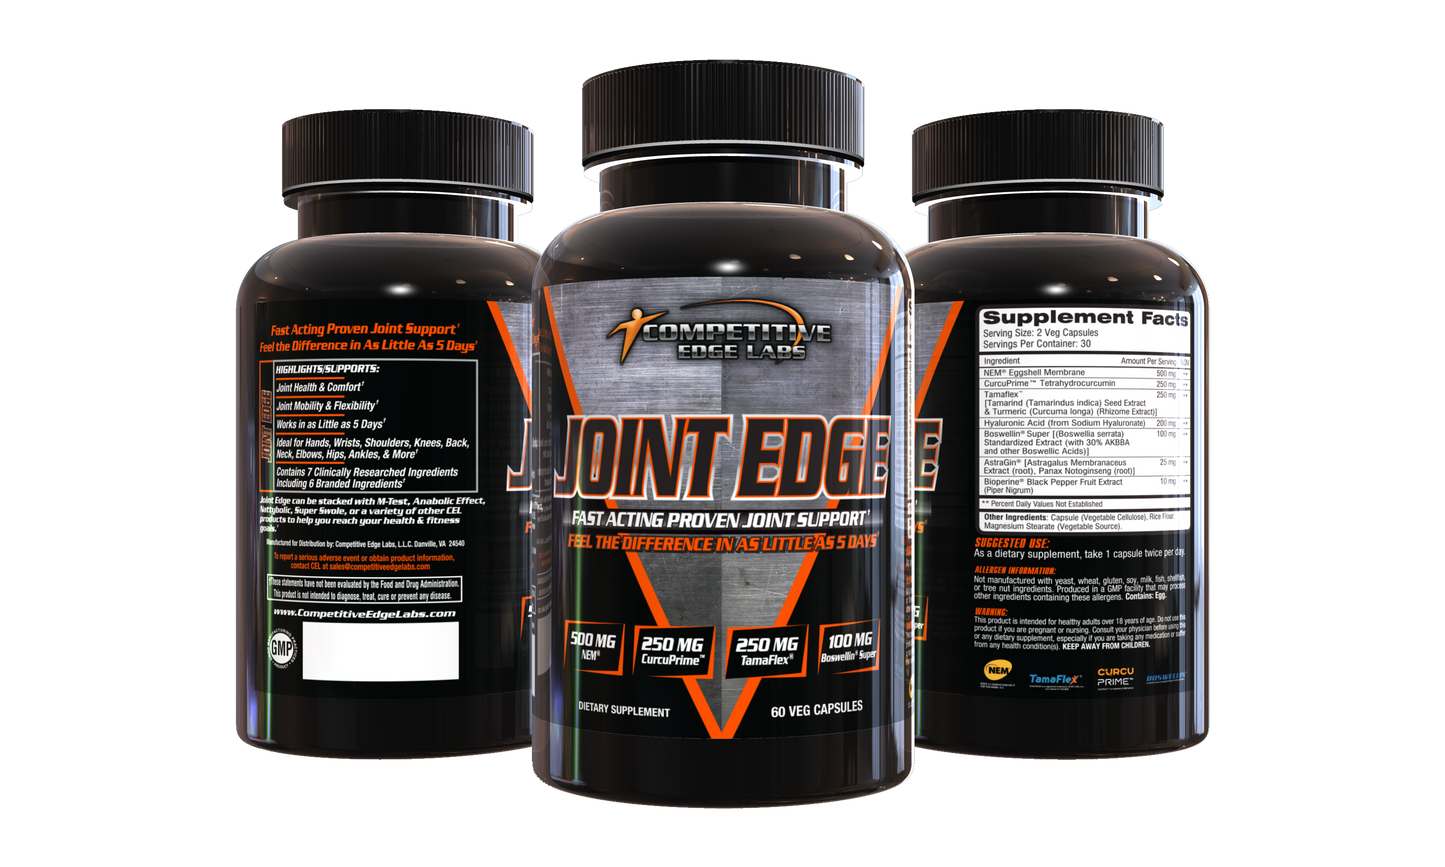 Competitive Edge Joint Edge 3 side